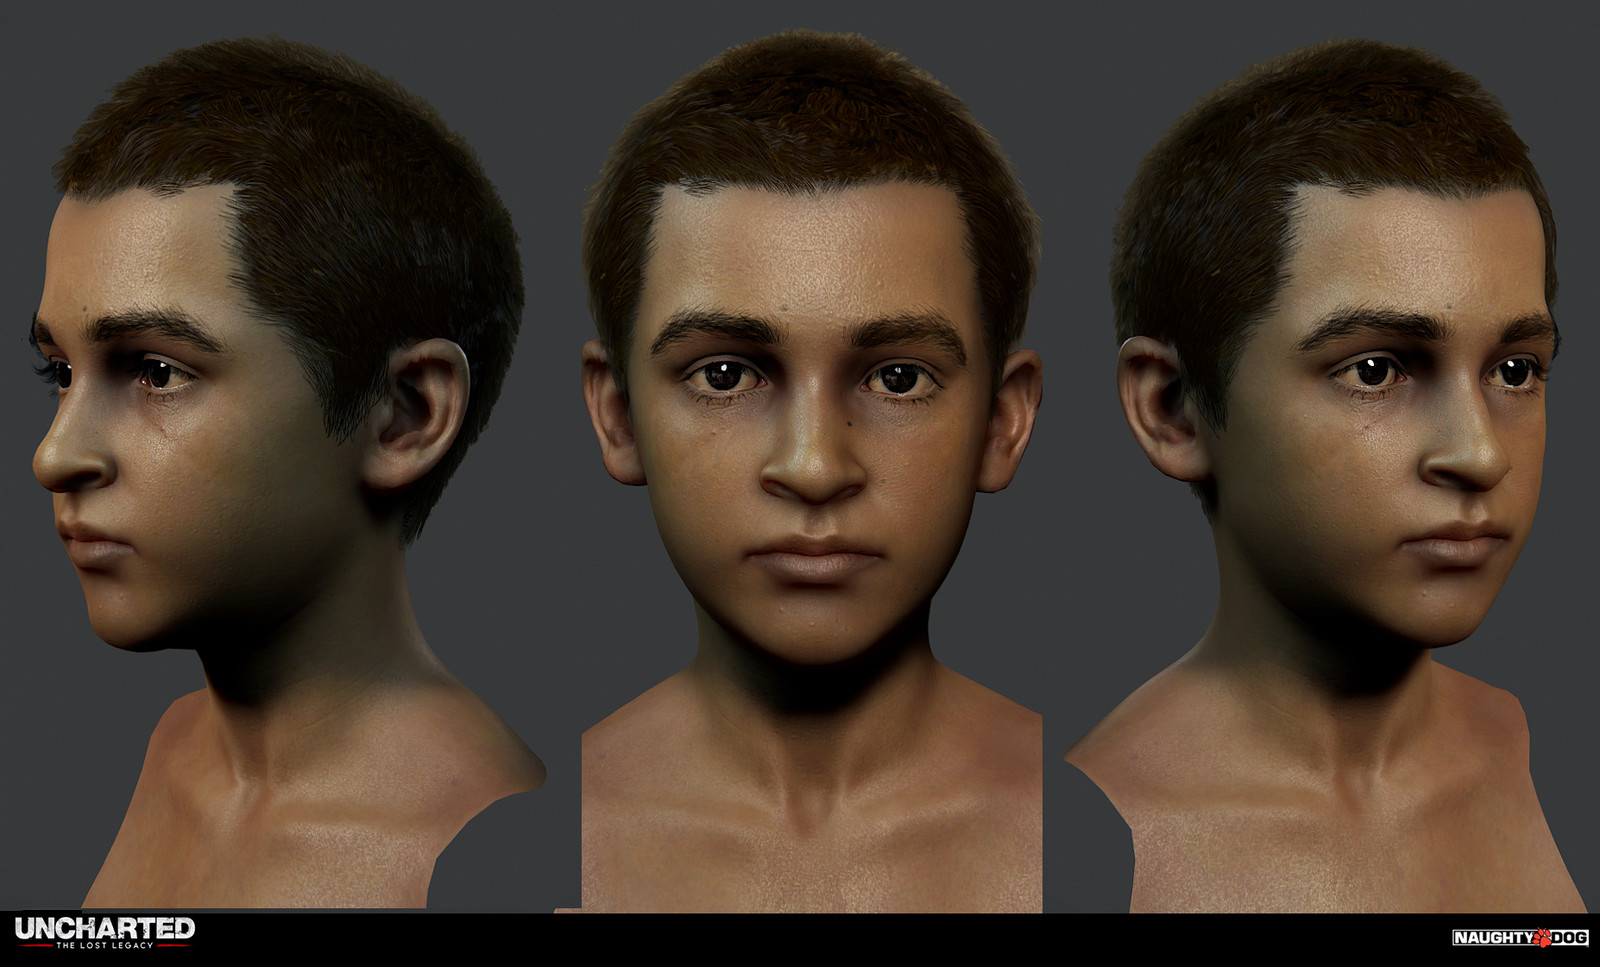 Npc head: head from scratch. Hair started from an existent archive and reworked for this character.